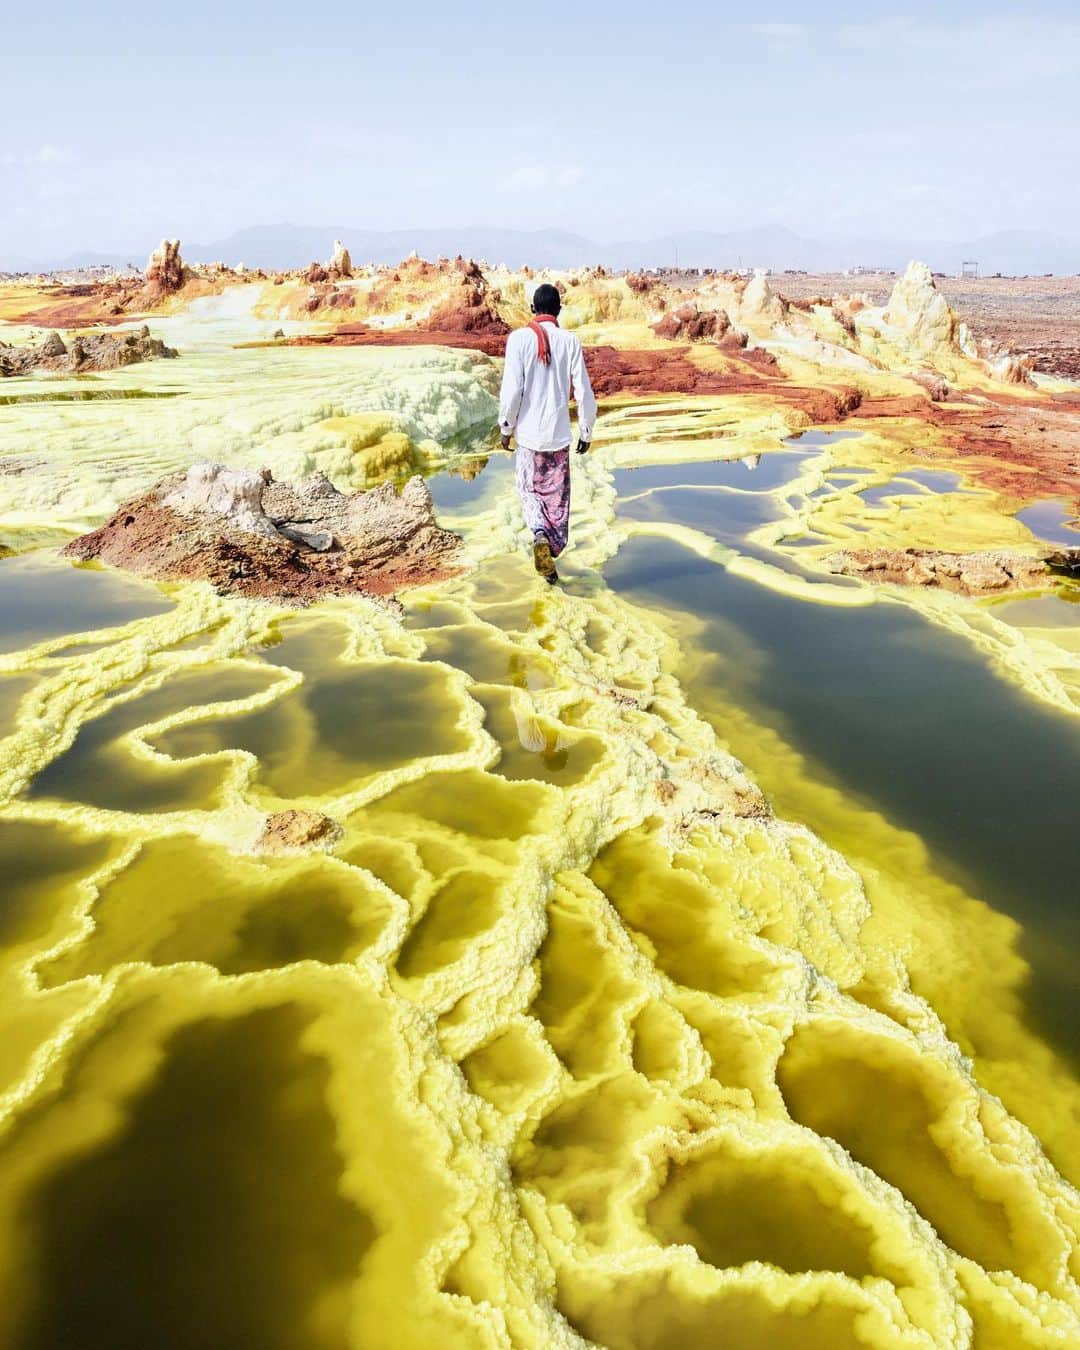 thephotosocietyのインスタグラム：「Photos by @andrea_frazzetta // Located in northern Ethiopia’s Afar Triangle, the Danakil Depression is where three tectonic plates meet. This vast plain is the homeland of the Afar nomads, who live off extracting minerals, namely salt, in one of the most inhospitable places on Earth. Follow @andrea_frazzetta for more images and stories. #Africa #Ethiopia #Danakil」